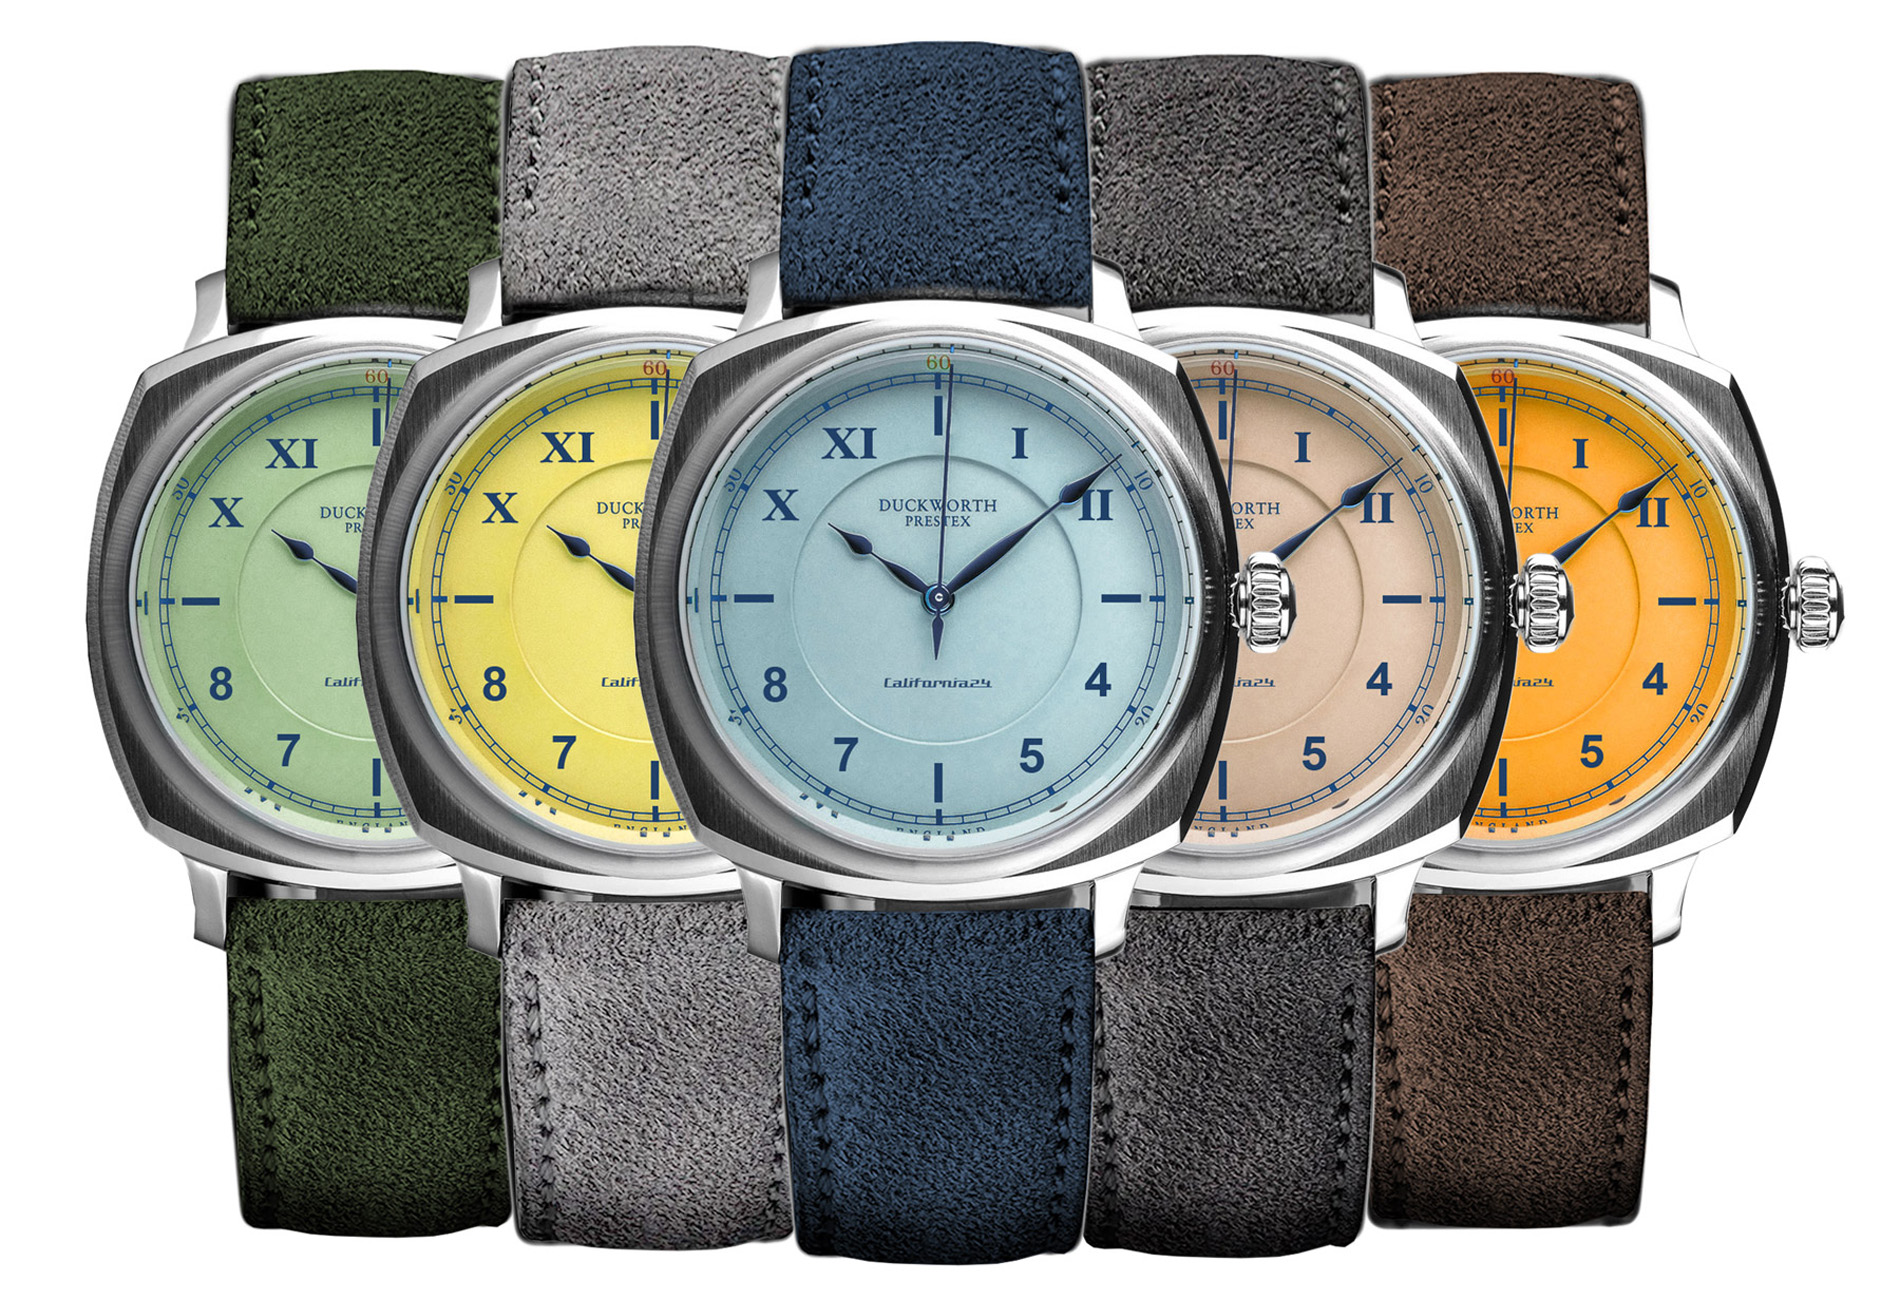 Duckworth Prestex plans California dial for its next limited edition